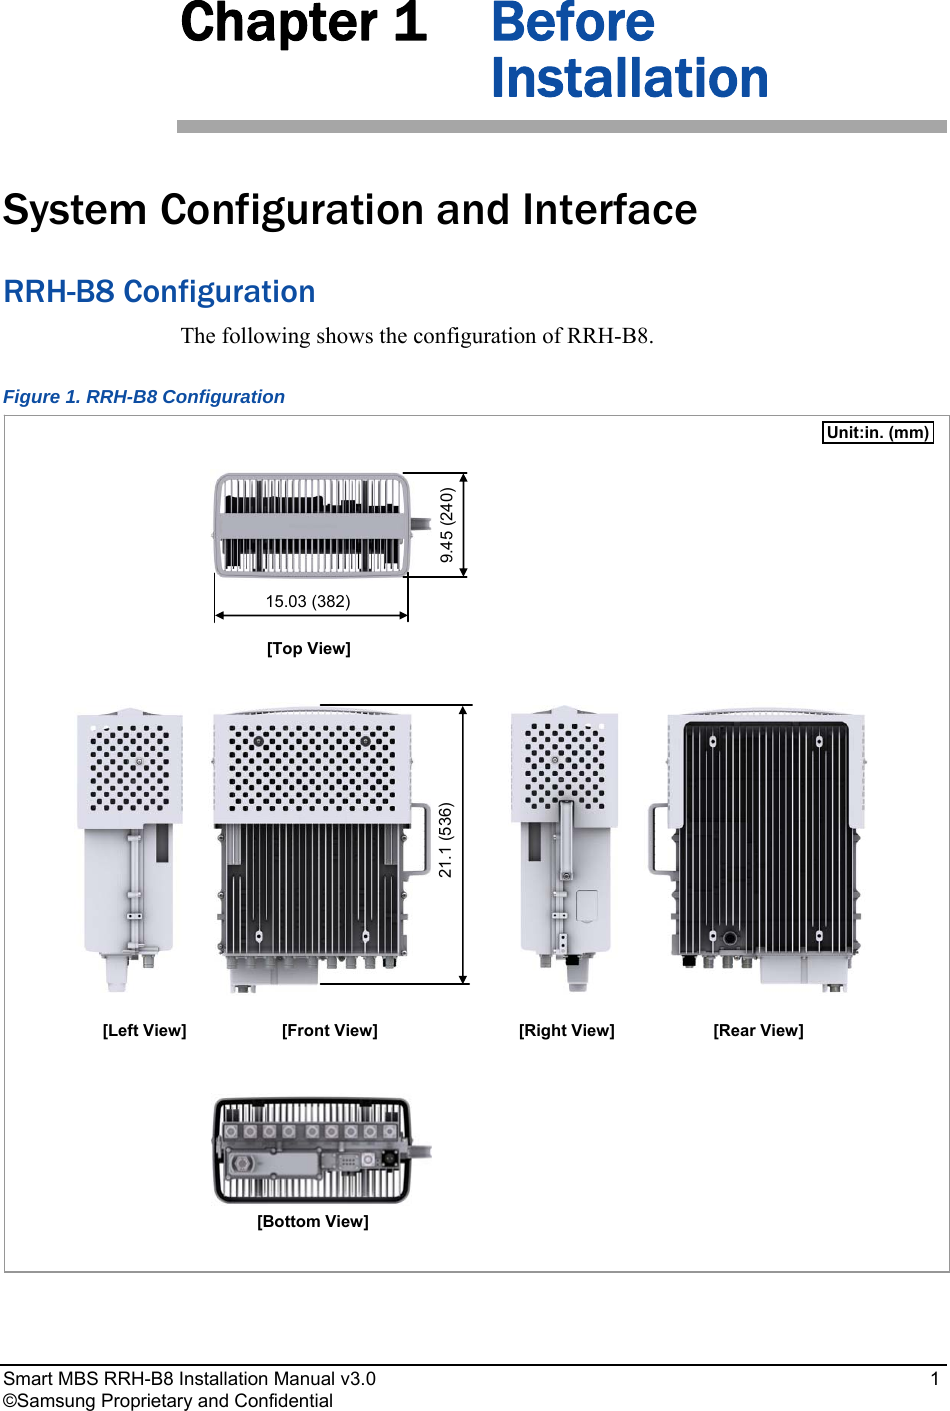  Smart MBS RRH-B8 Installation Manual v3.0   1 ©Samsung Proprietary and Confidential Chapter 1 Before Installation System Configuration and Interface RRH-B8 Configuration The following shows the configuration of RRH-B8. Figure 1. RRH-B8 Configuration  [Top View] [Front View][Bottom View][Right View] [Left View]  [Rear View] 21.1 (536)  9.45 (240) 15.03 (382) Unit:in. (mm)